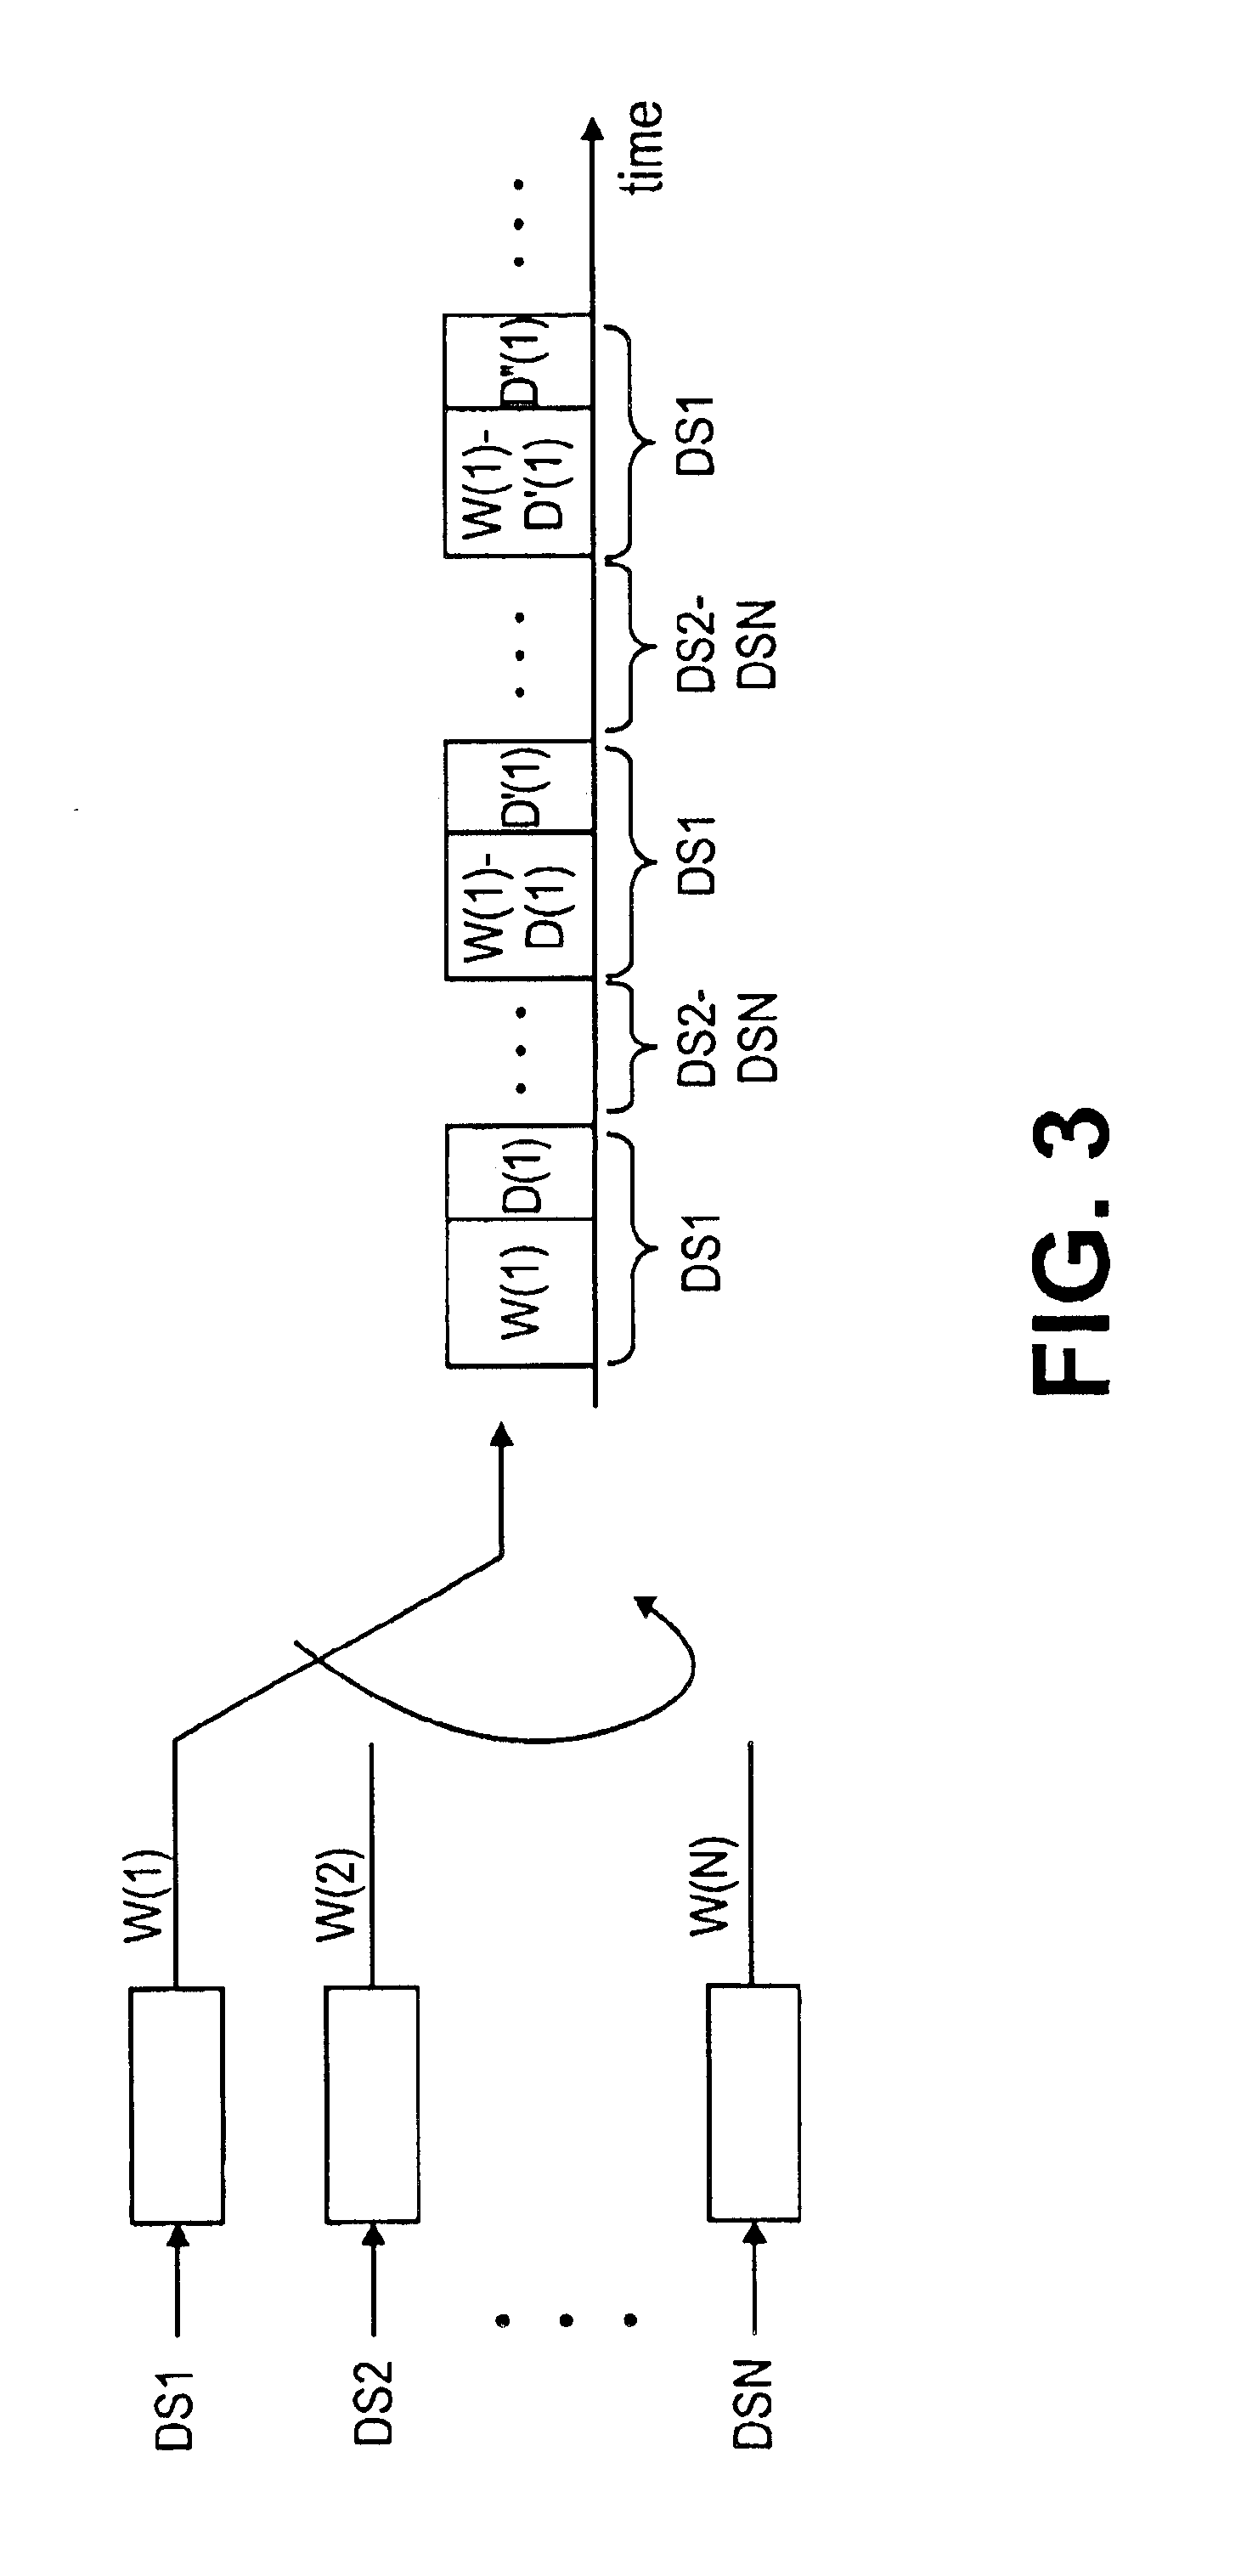 Method and apparatus to minimize congestion in a packet switched network